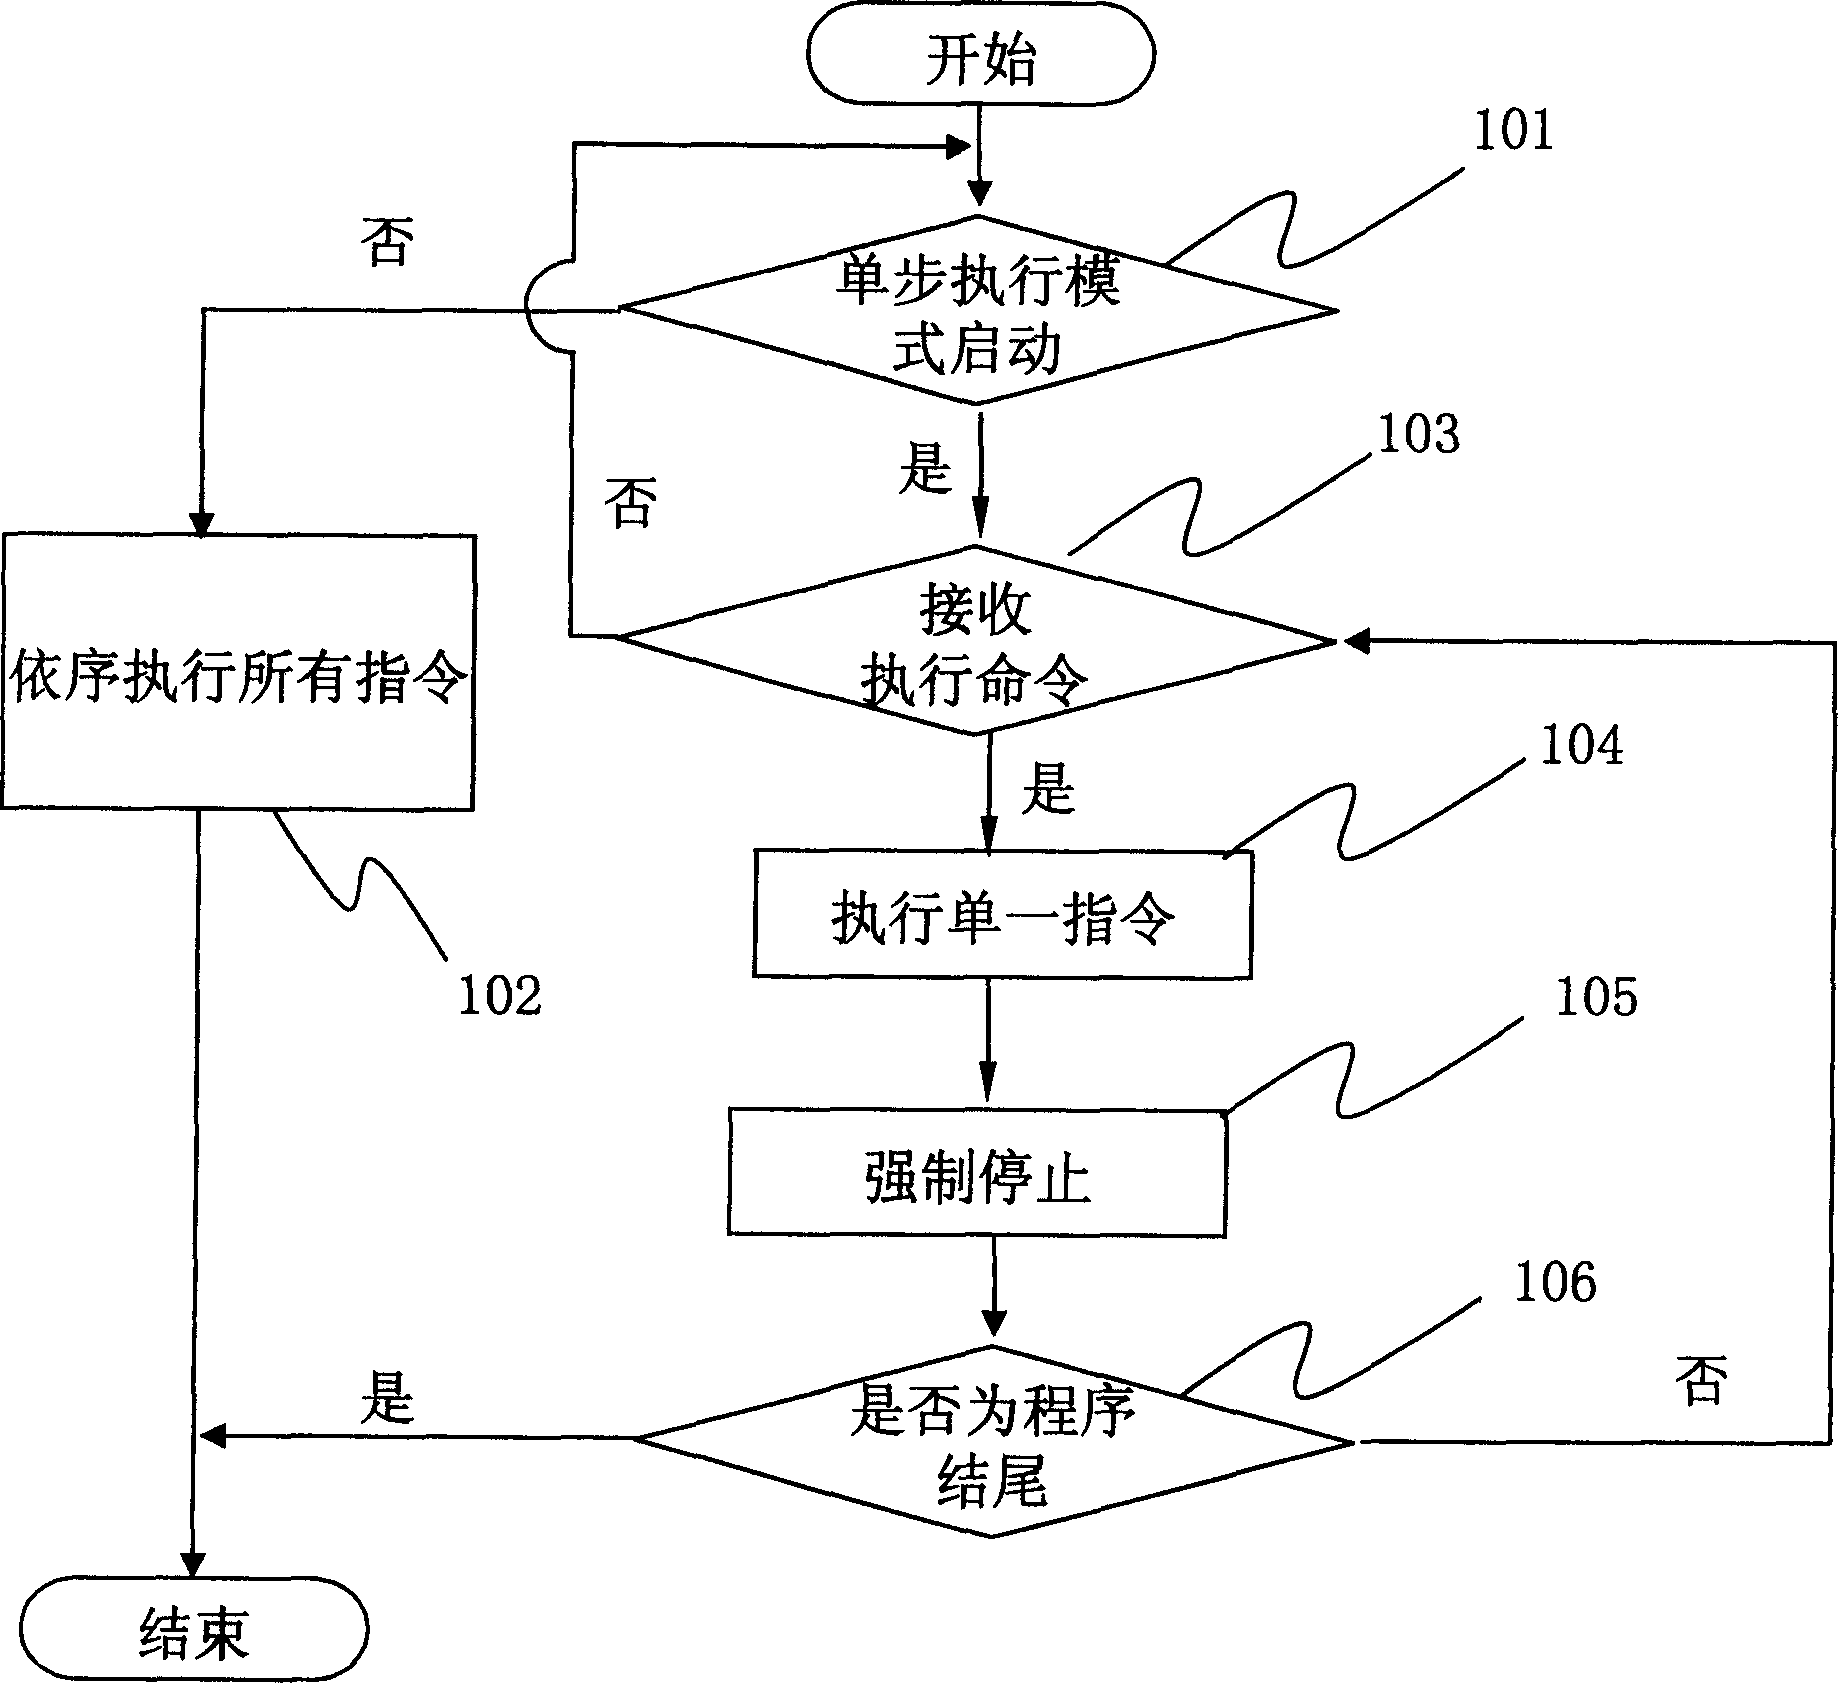 Method for executing program of PLC in single step